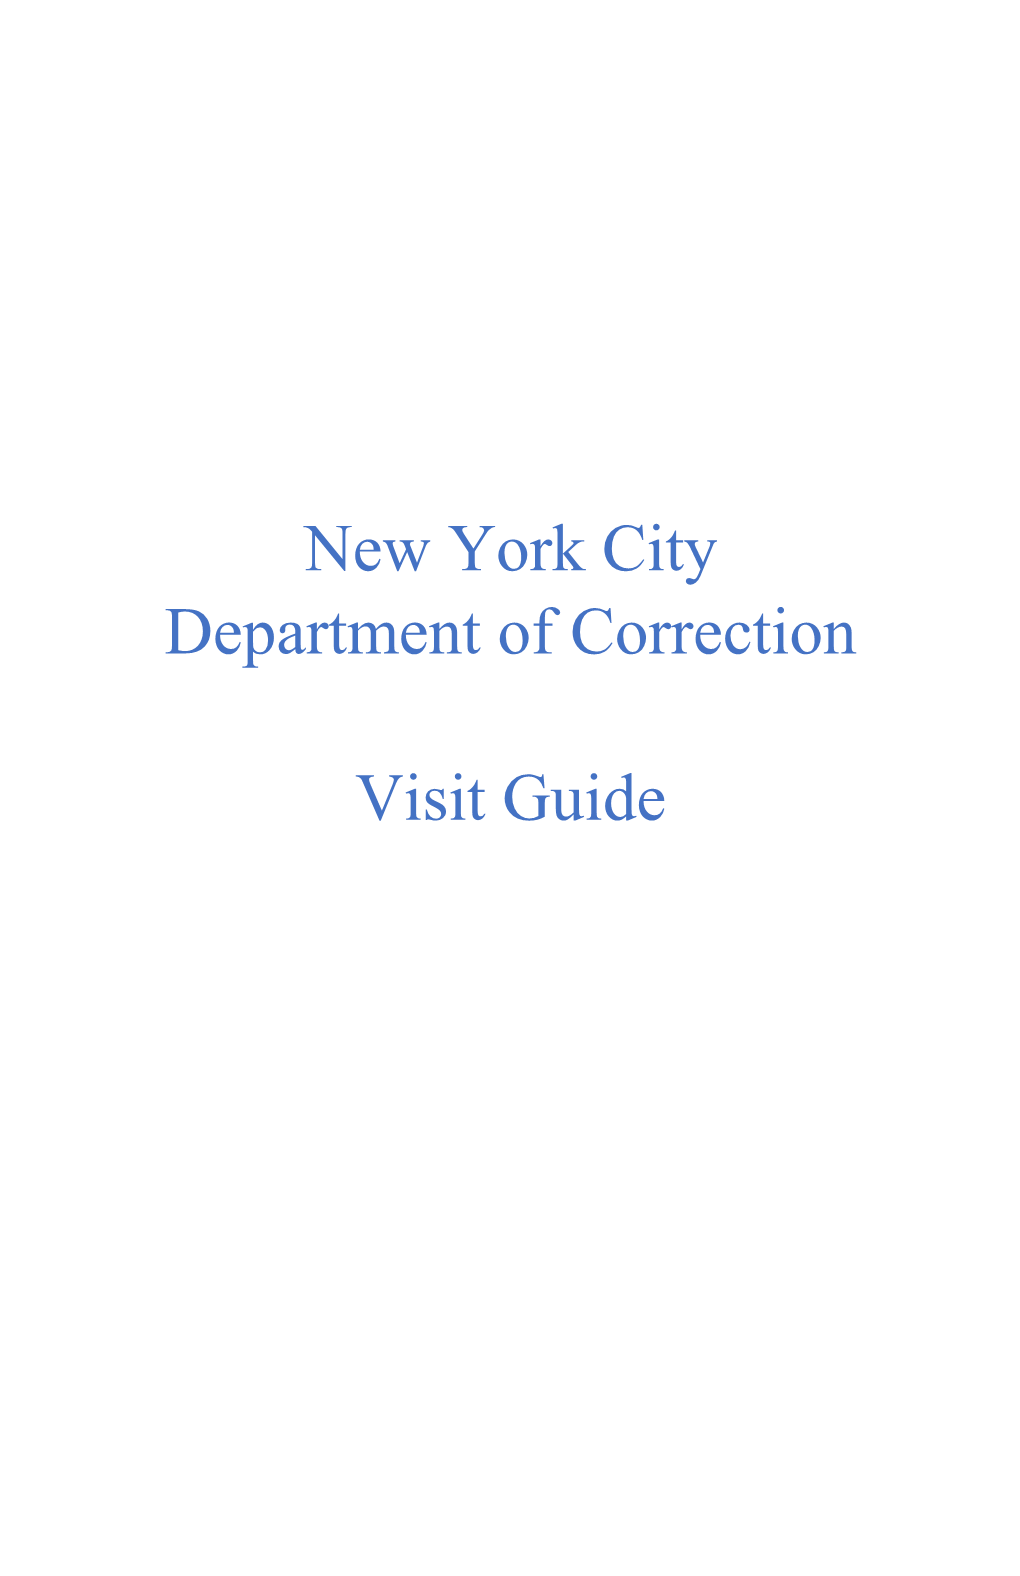 New York City Department of Correction Visit Guide